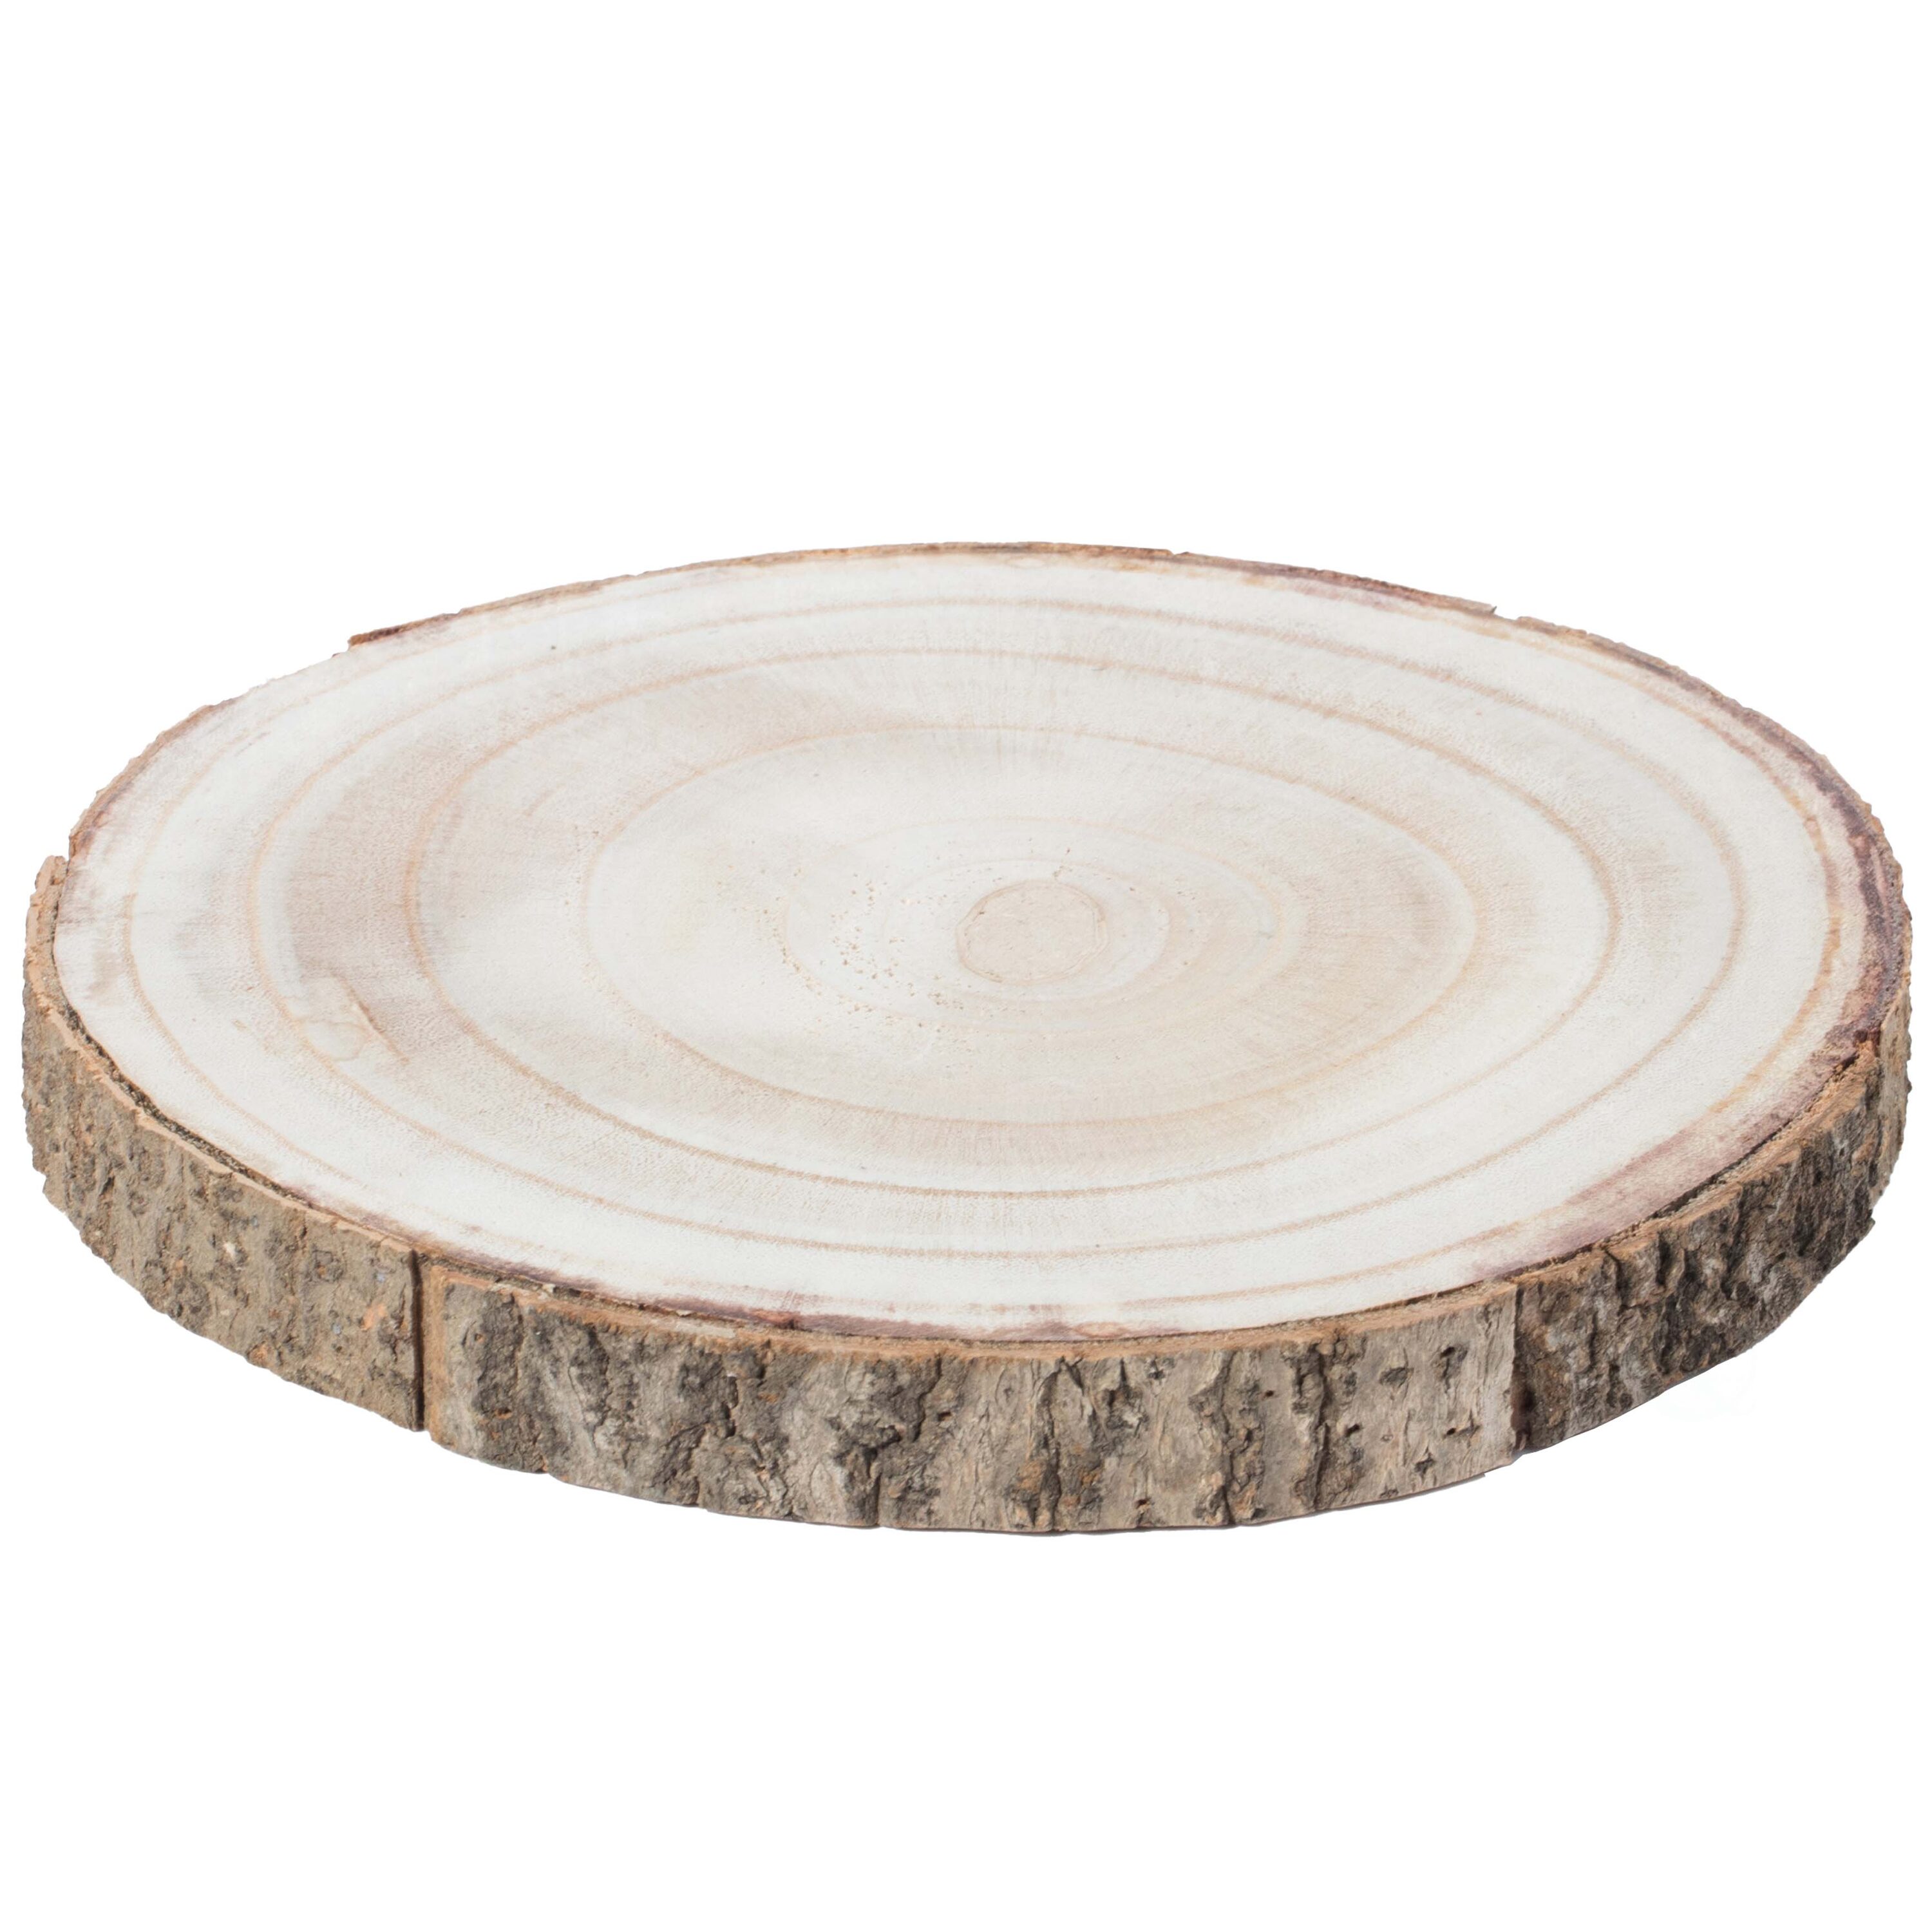 Find Elegant Thin Wood Slices For Varied Purposes 